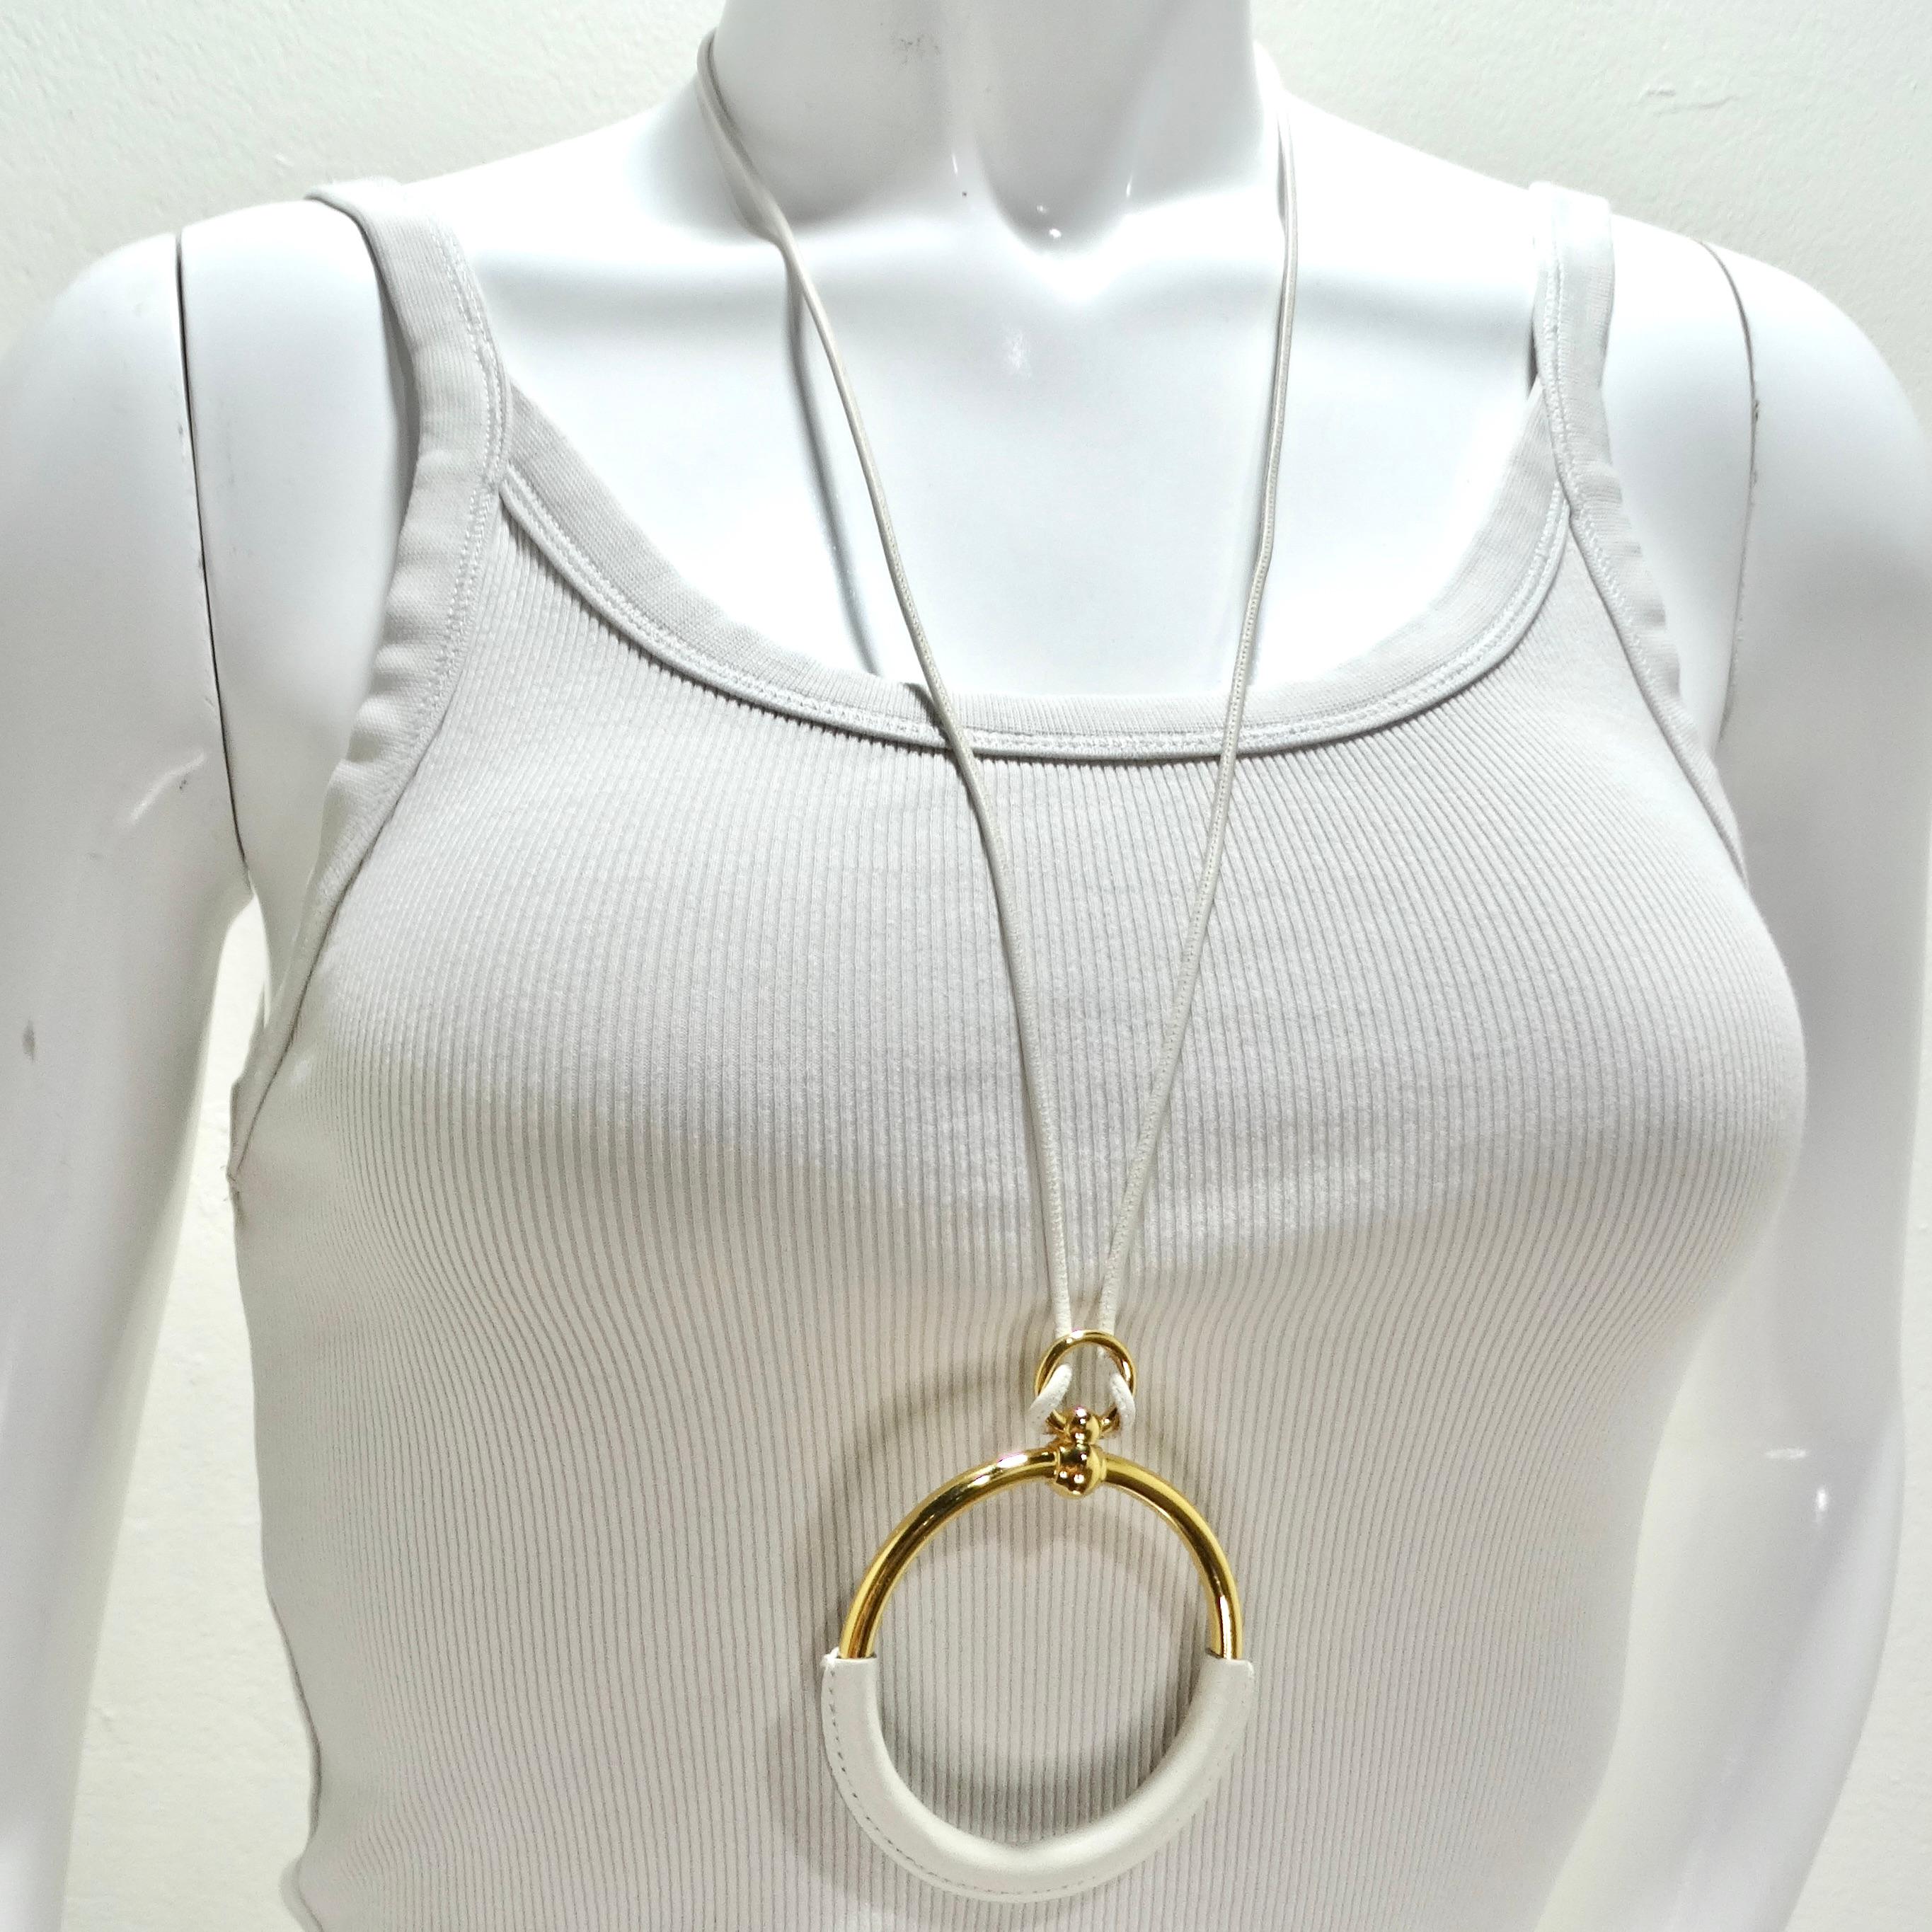 Hermes White Leather Loop Pendent Necklace In Excellent Condition For Sale In Scottsdale, AZ